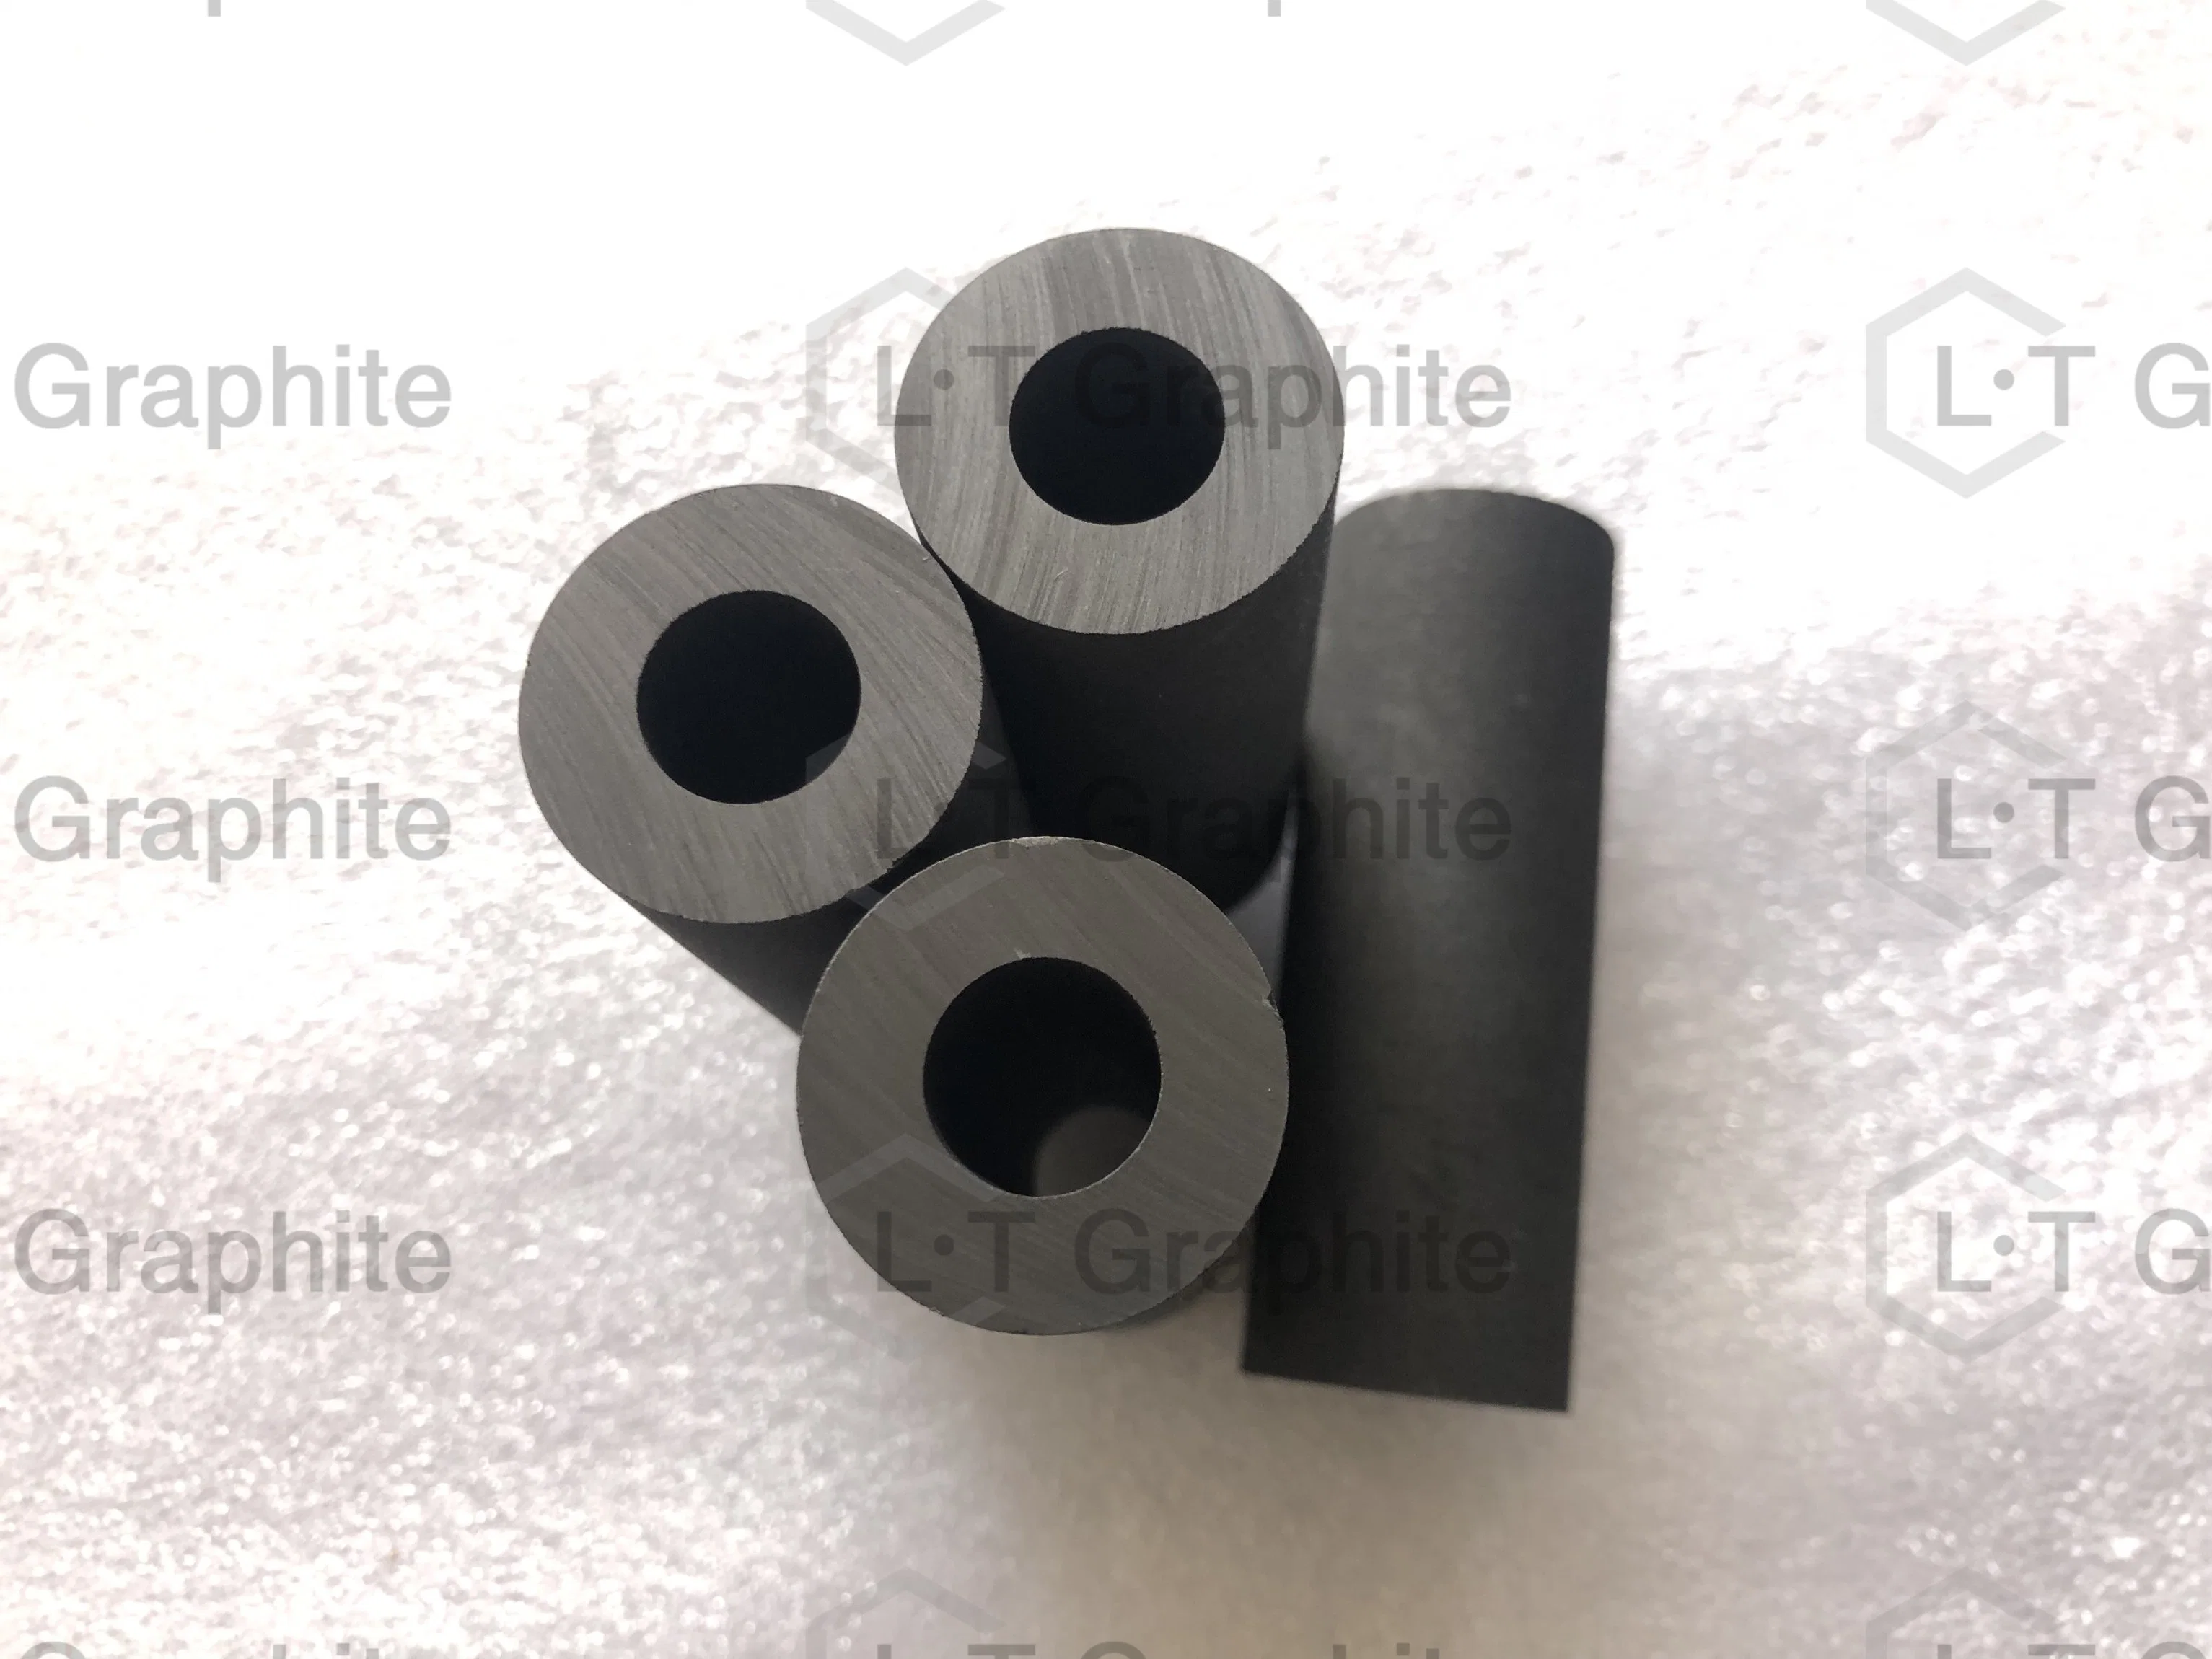 High Purified Graphite Pipe Widely Used in Electronics, Machinery, Chemical etc Industries